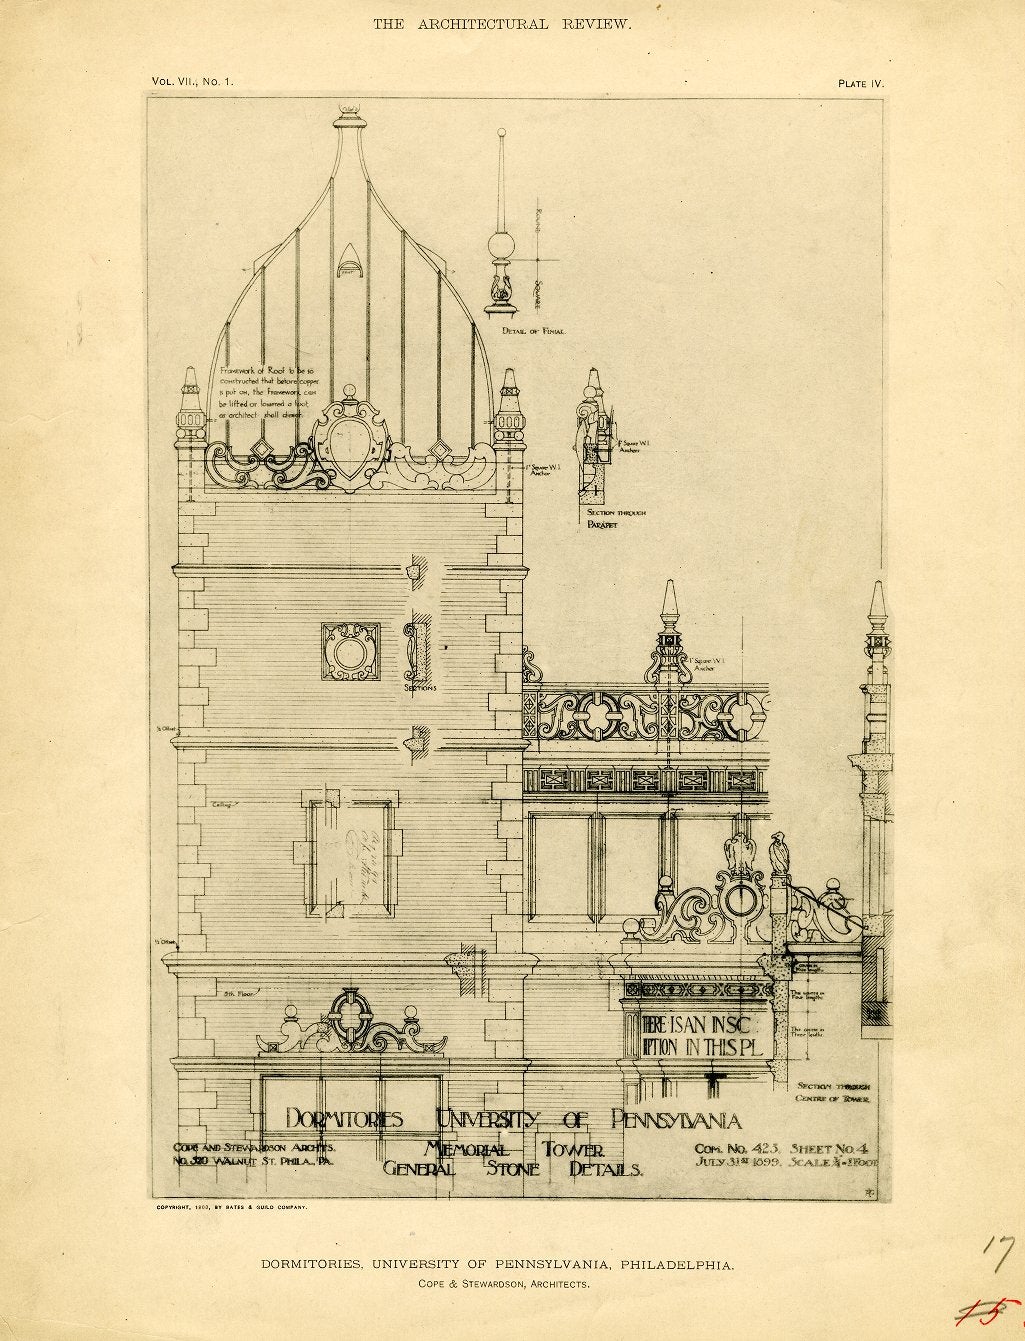 Dormitory Quadrangle, Memorial Tower, architectural drawing, 1899